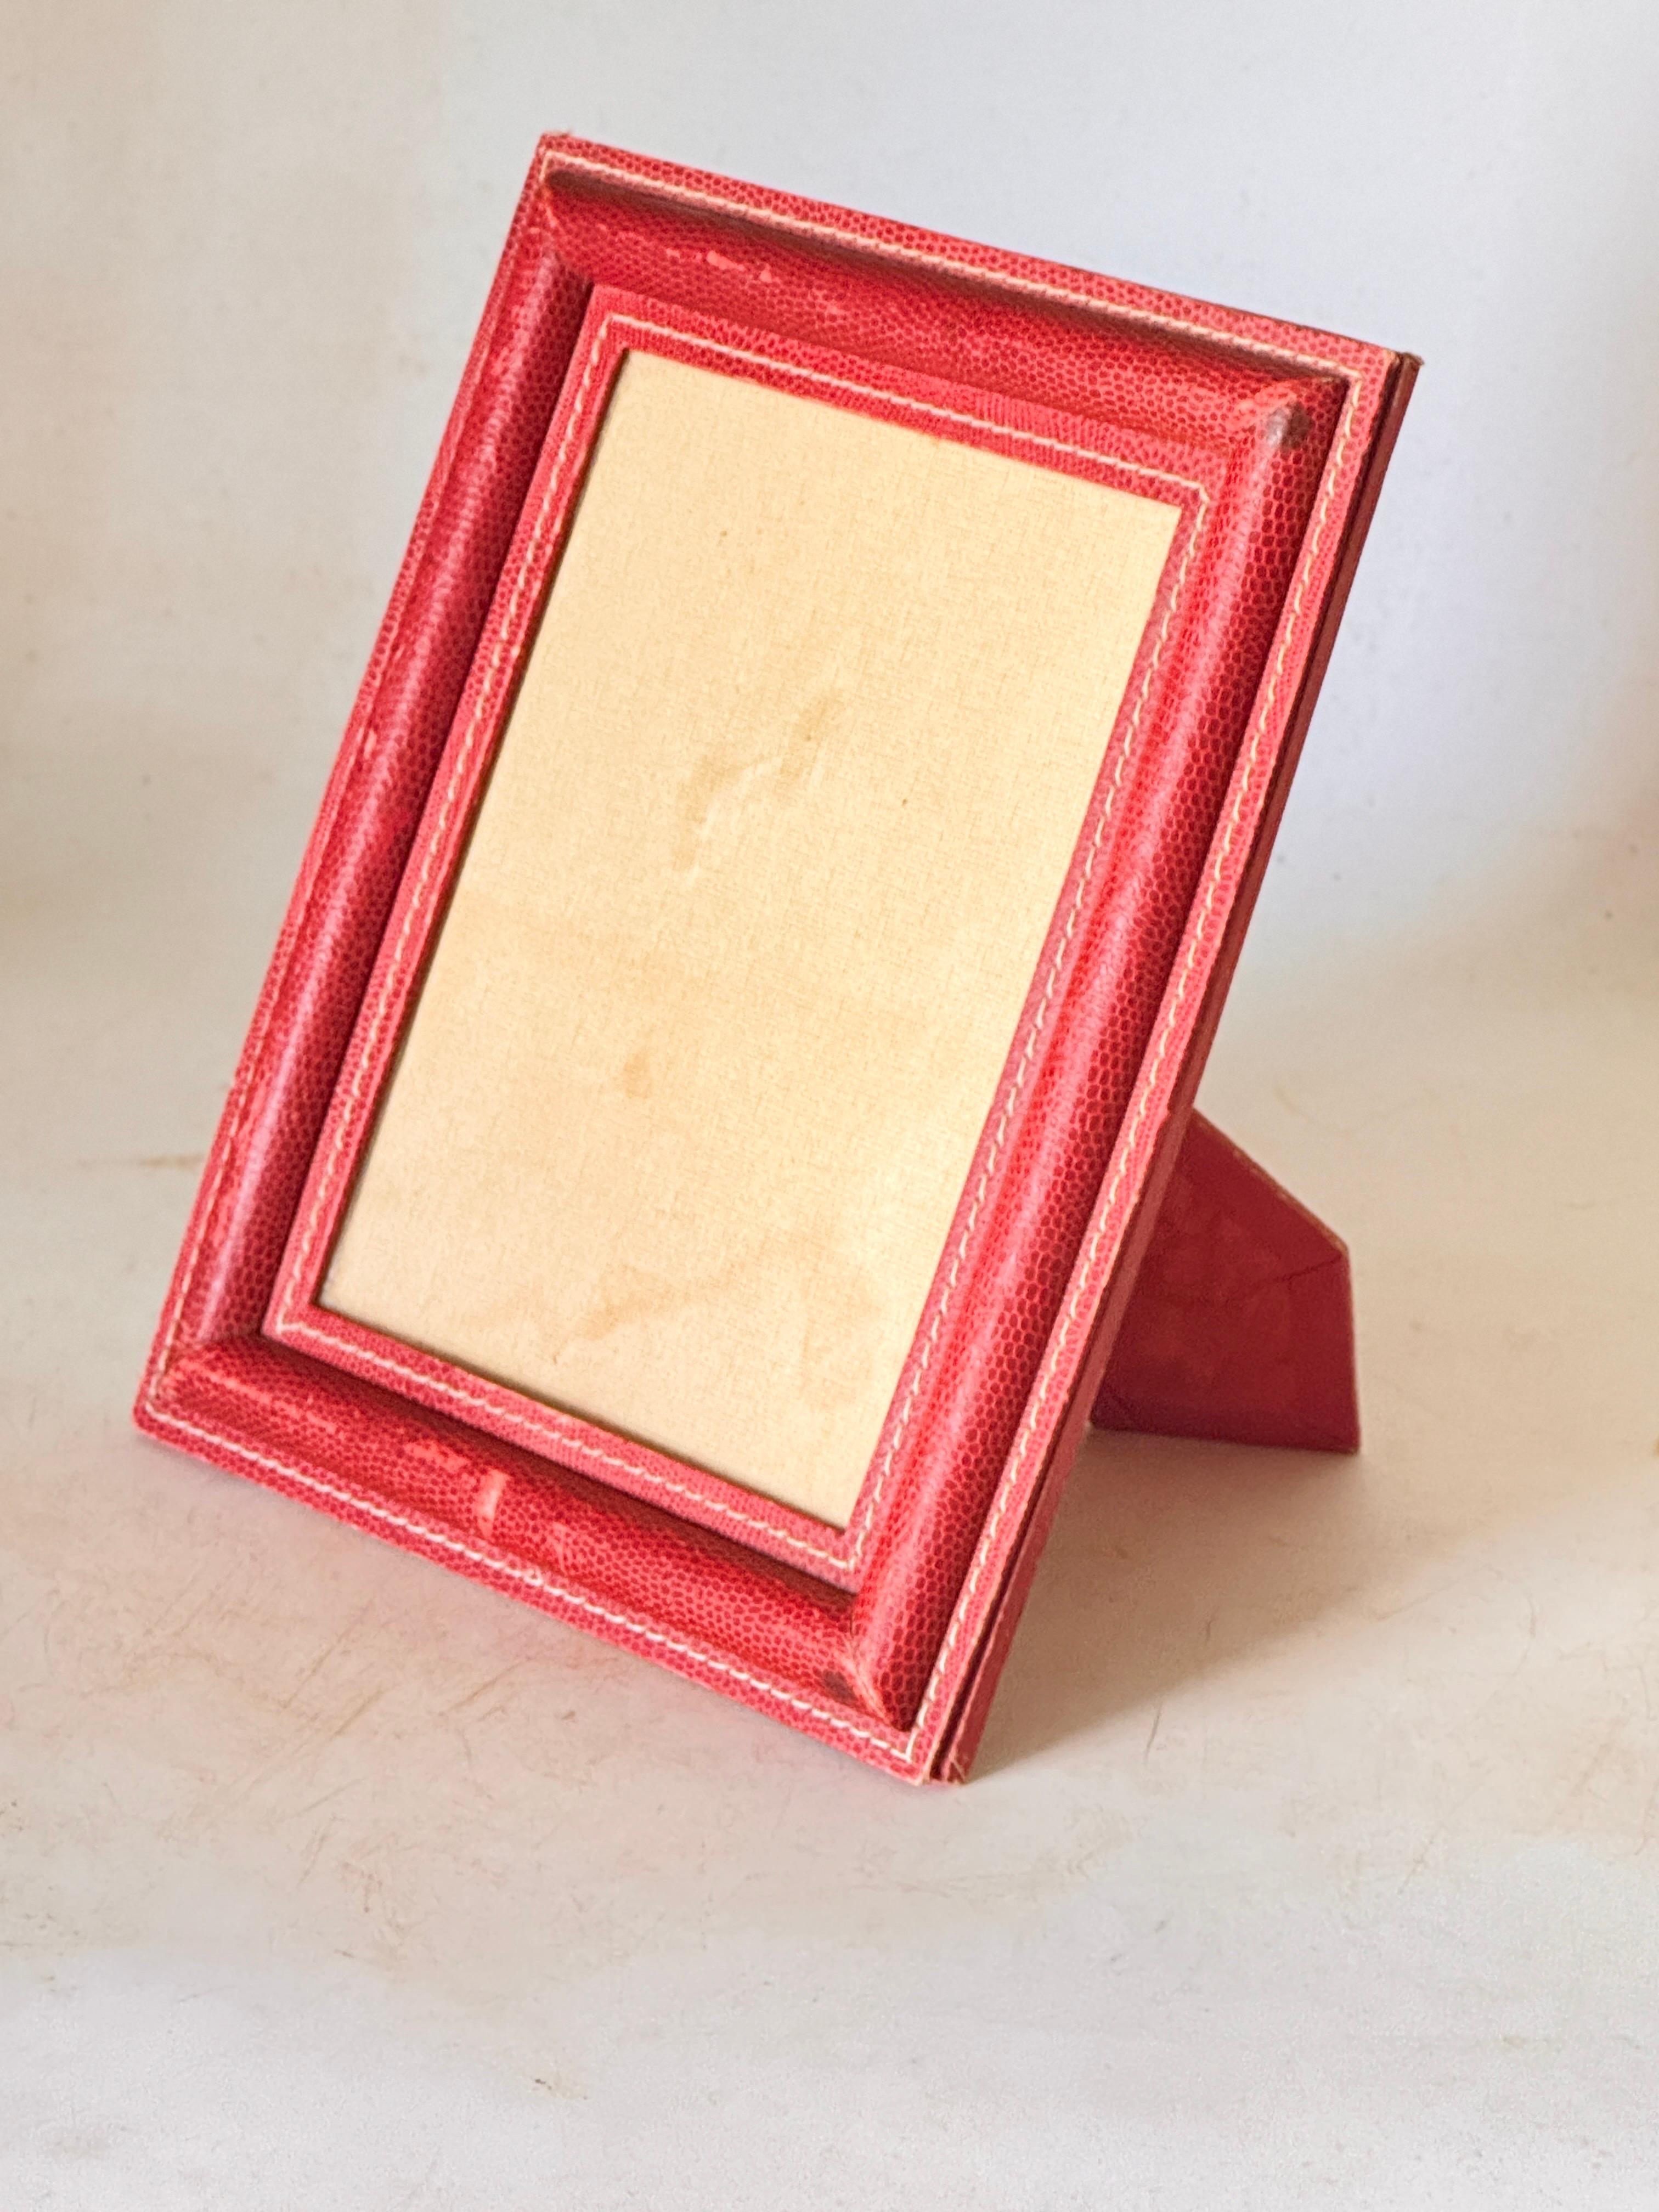 Jacques Adnet Style, Red Stitched Leather Picture Frame, France 1940 For Sale 2